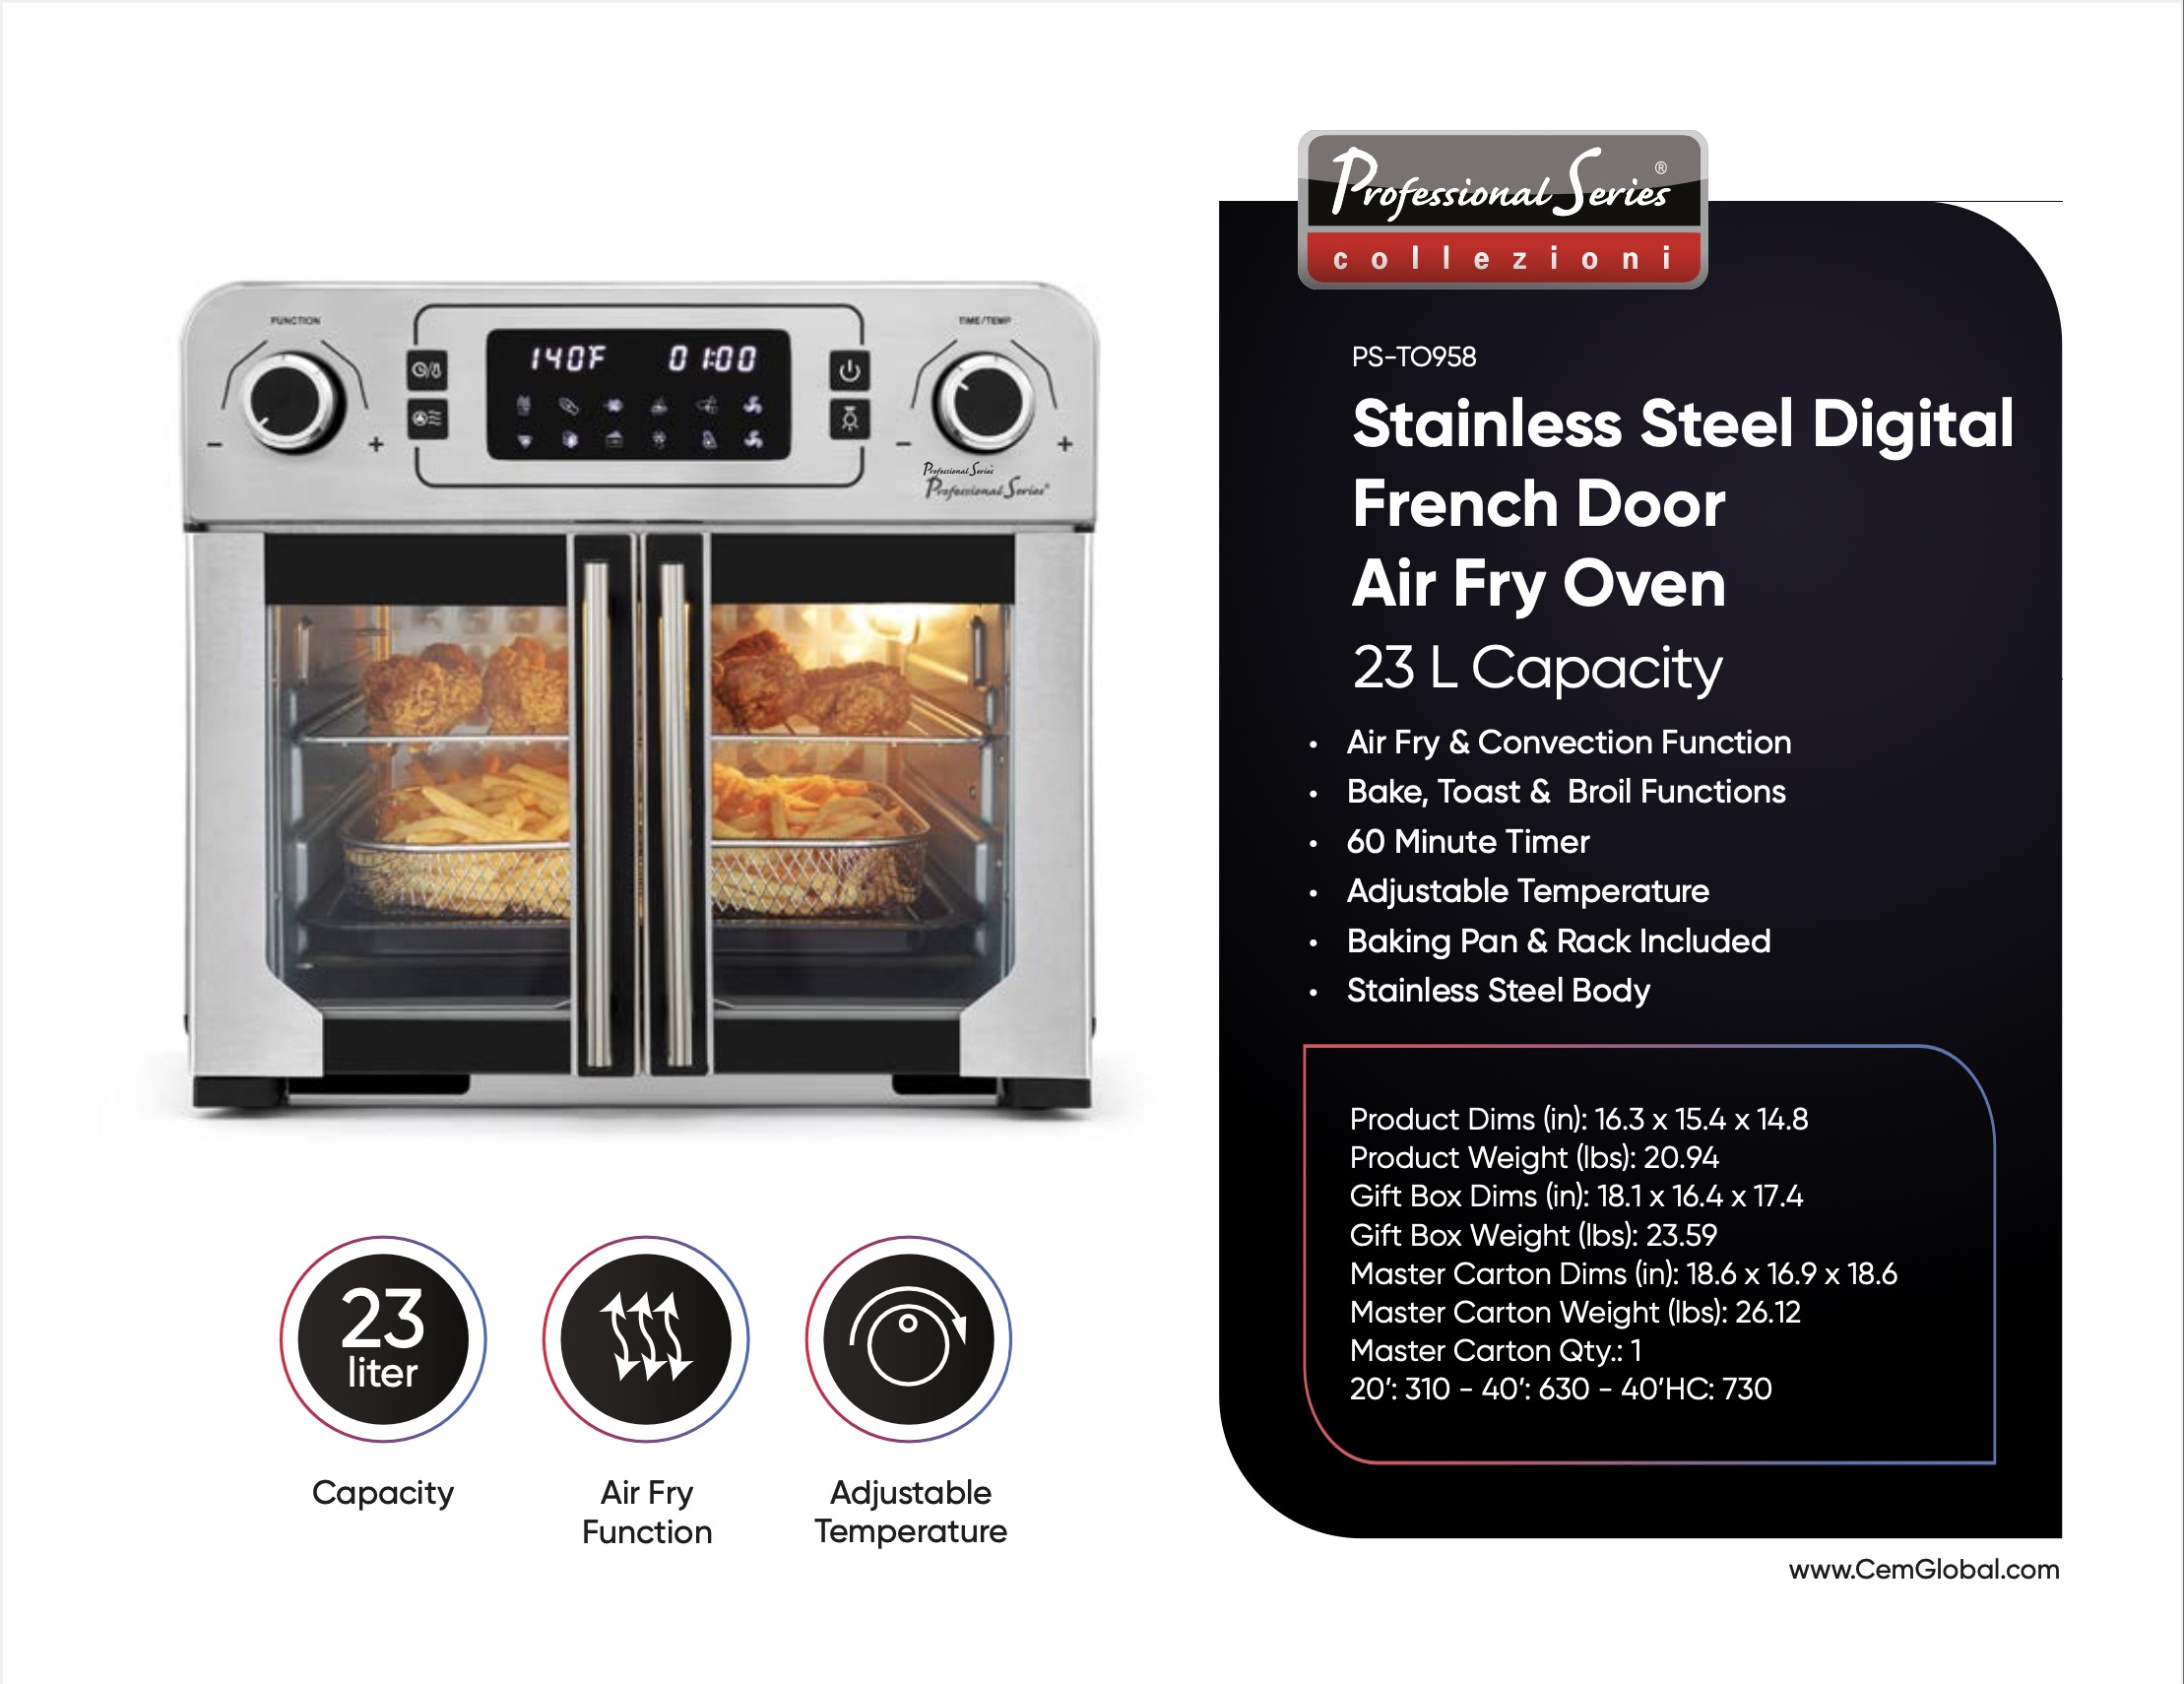 Stainless Steel Digital French Door Air Fry Oven 23 L